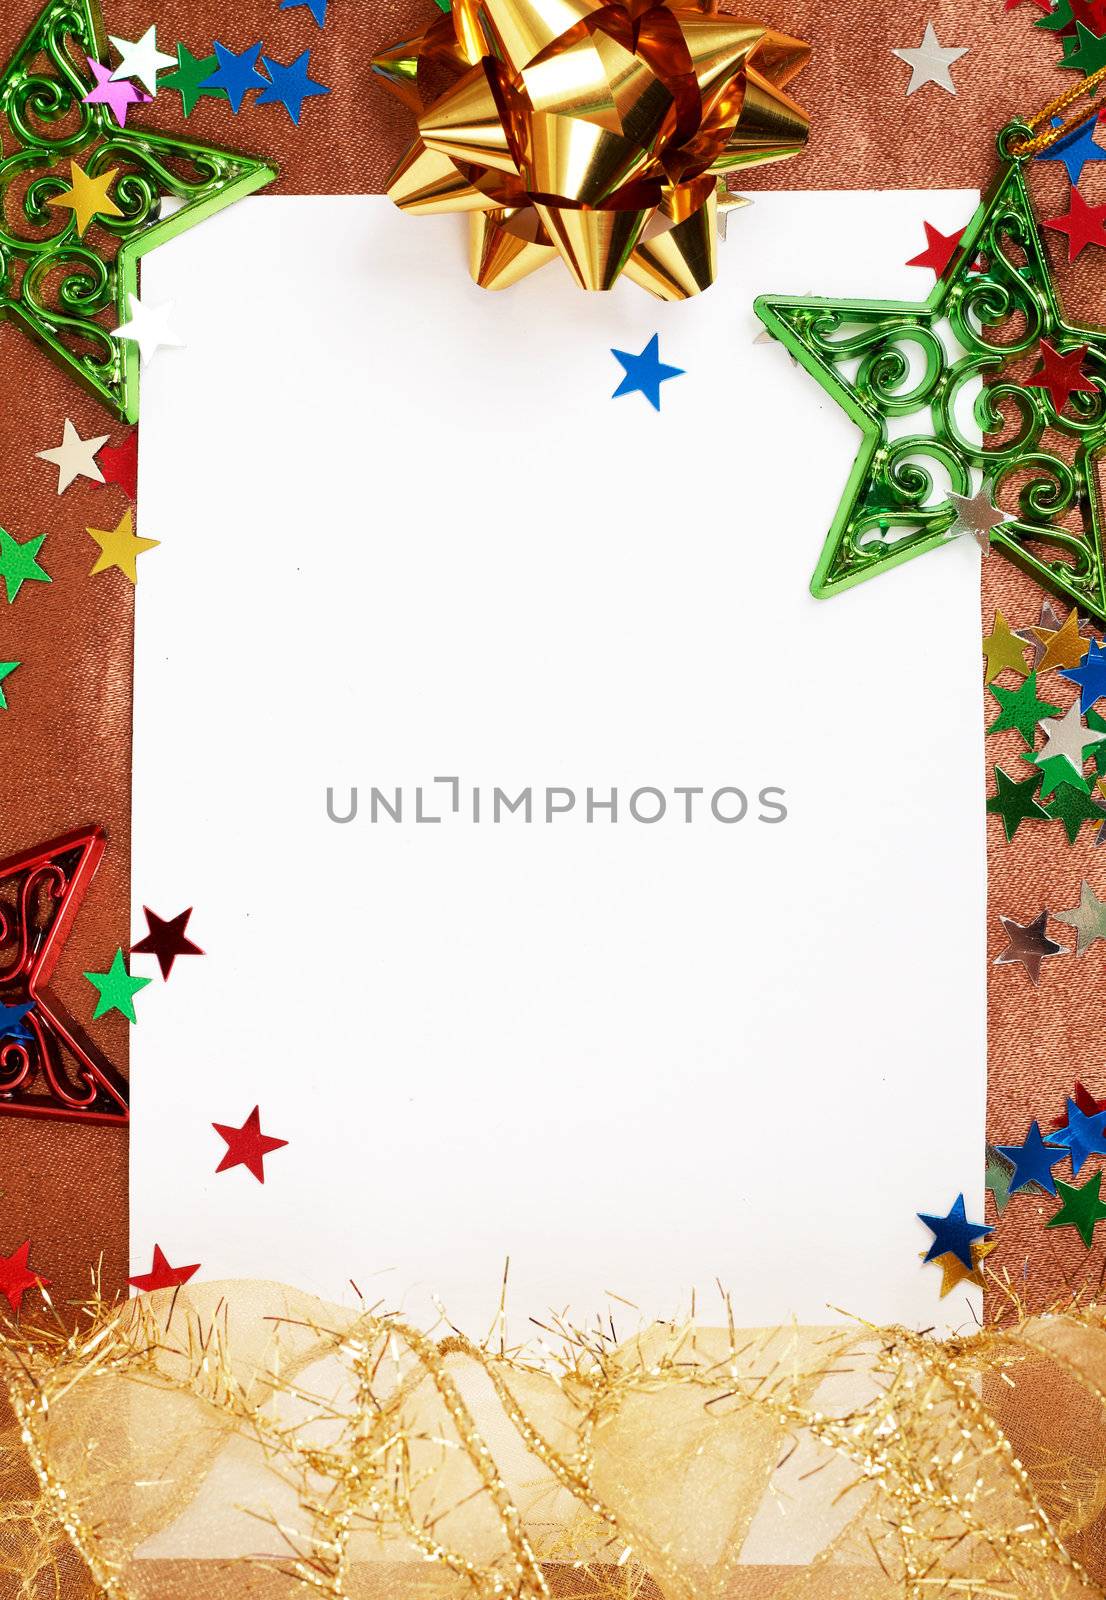 White Christmas card with decorations by Elenat